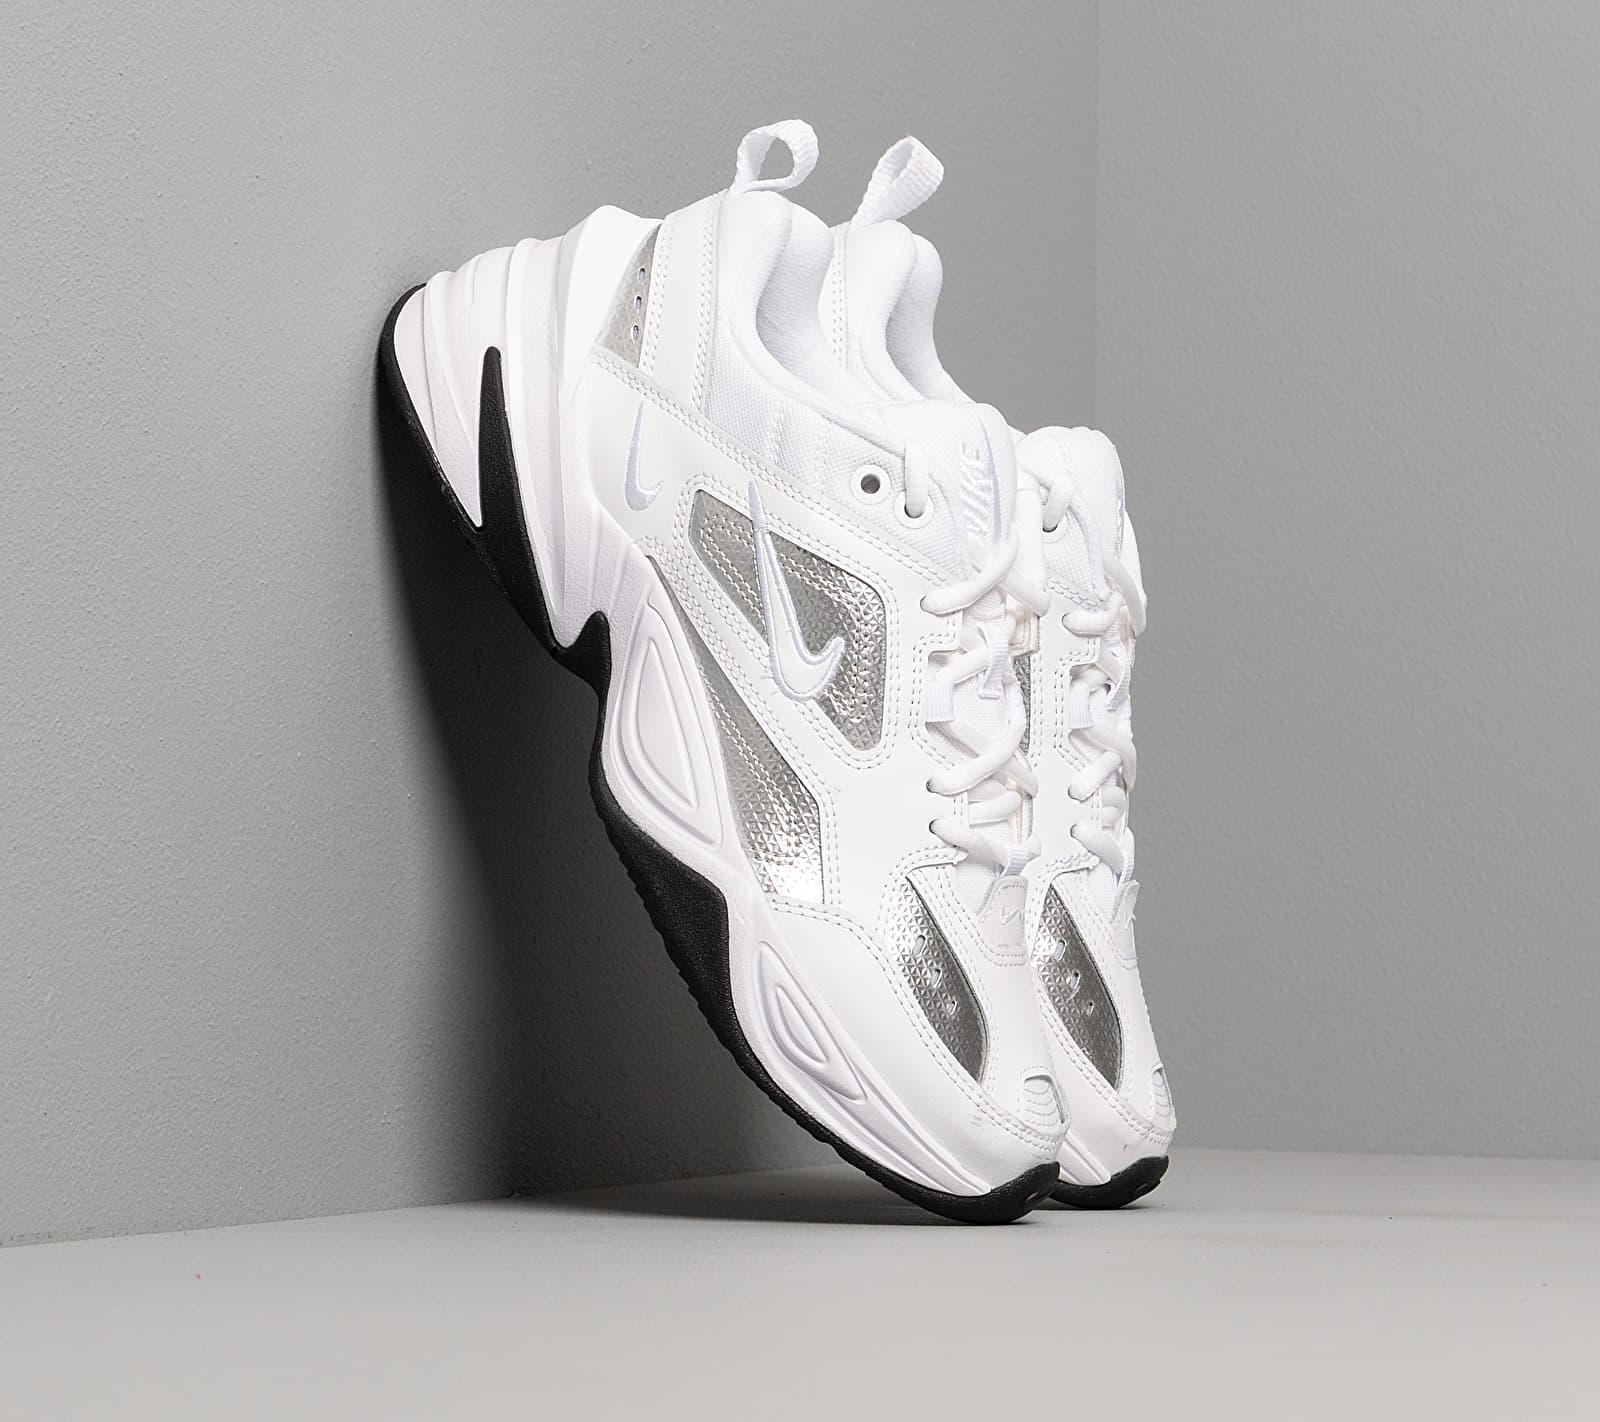 Nike Leather White & Silver M2k Tekno Trainers - Lyst